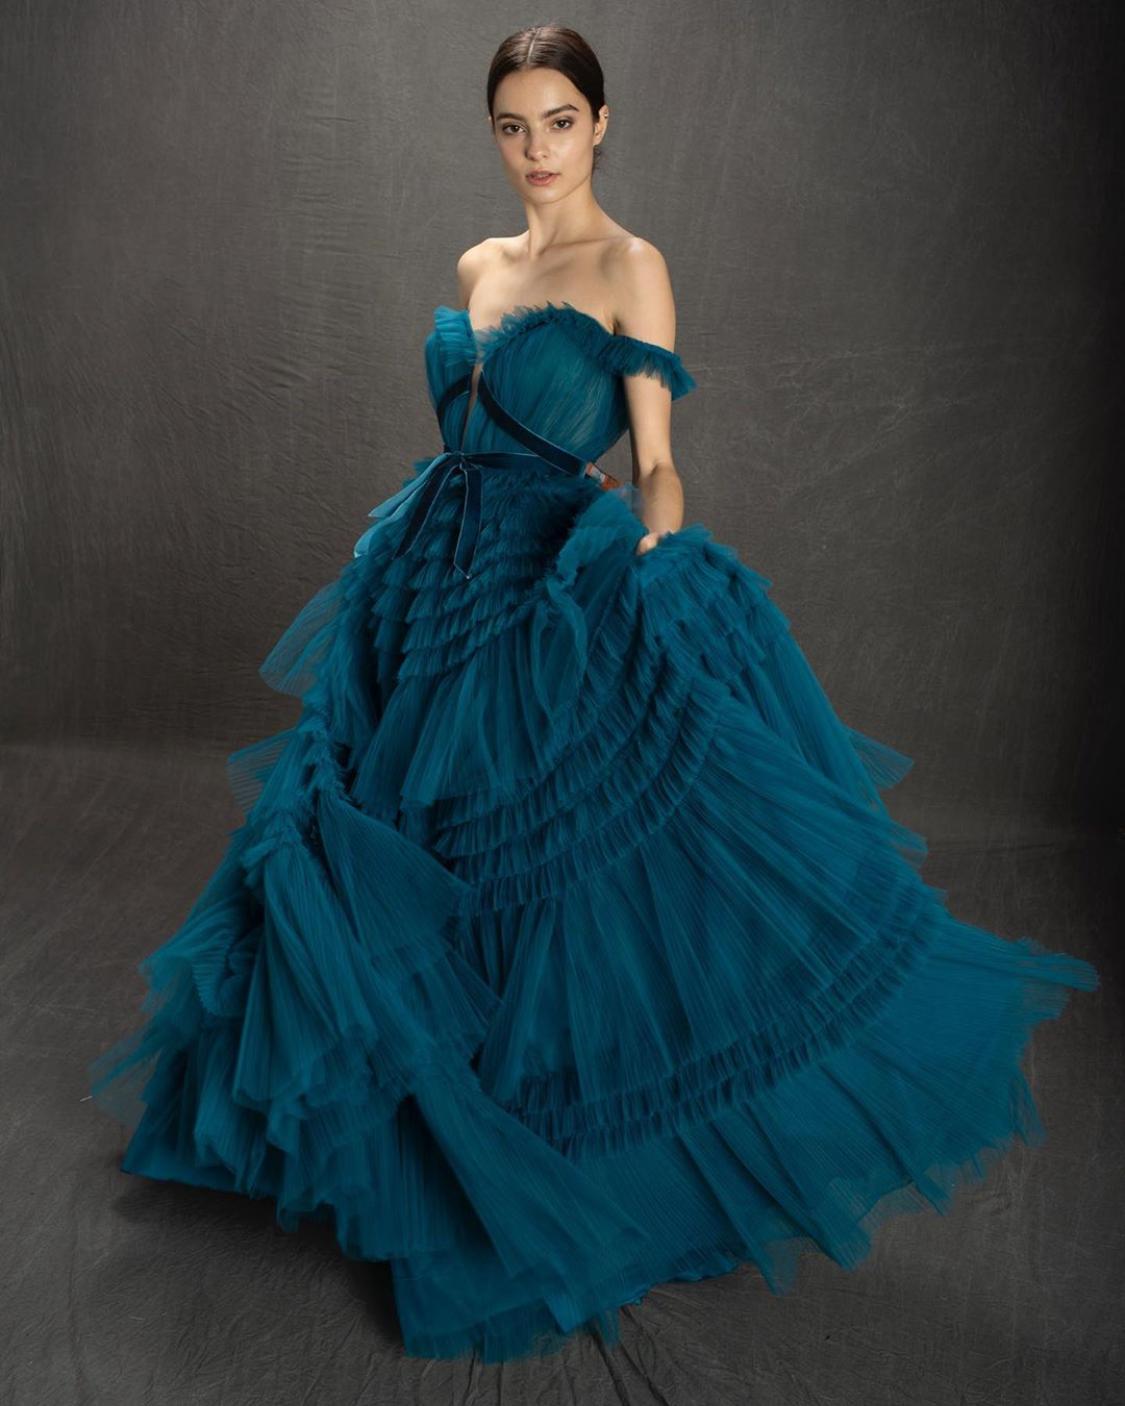 Blue A-Line dress with off the shoulder sleeves and ruffles